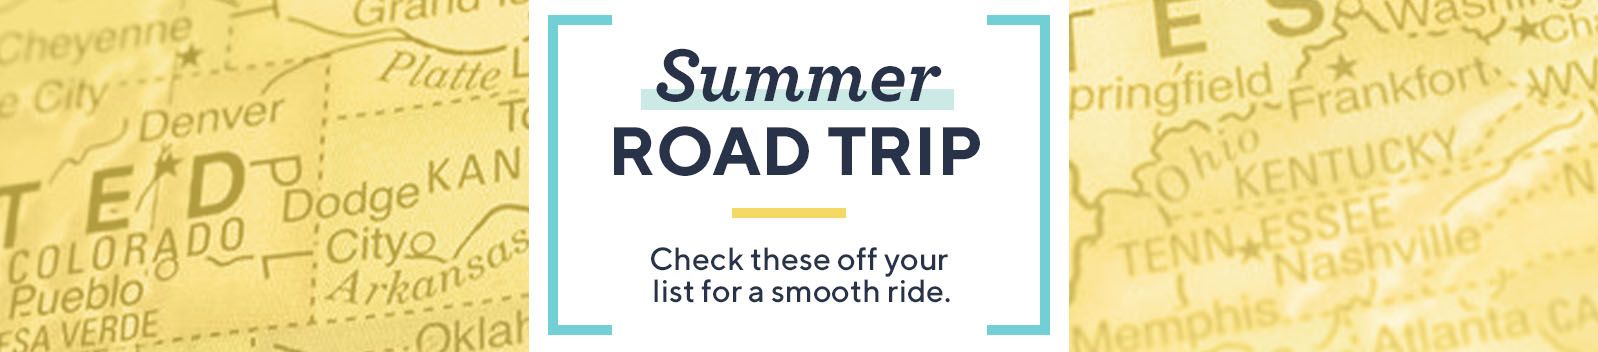 Summer Road Trip. Check these off your list for a smooth ride.